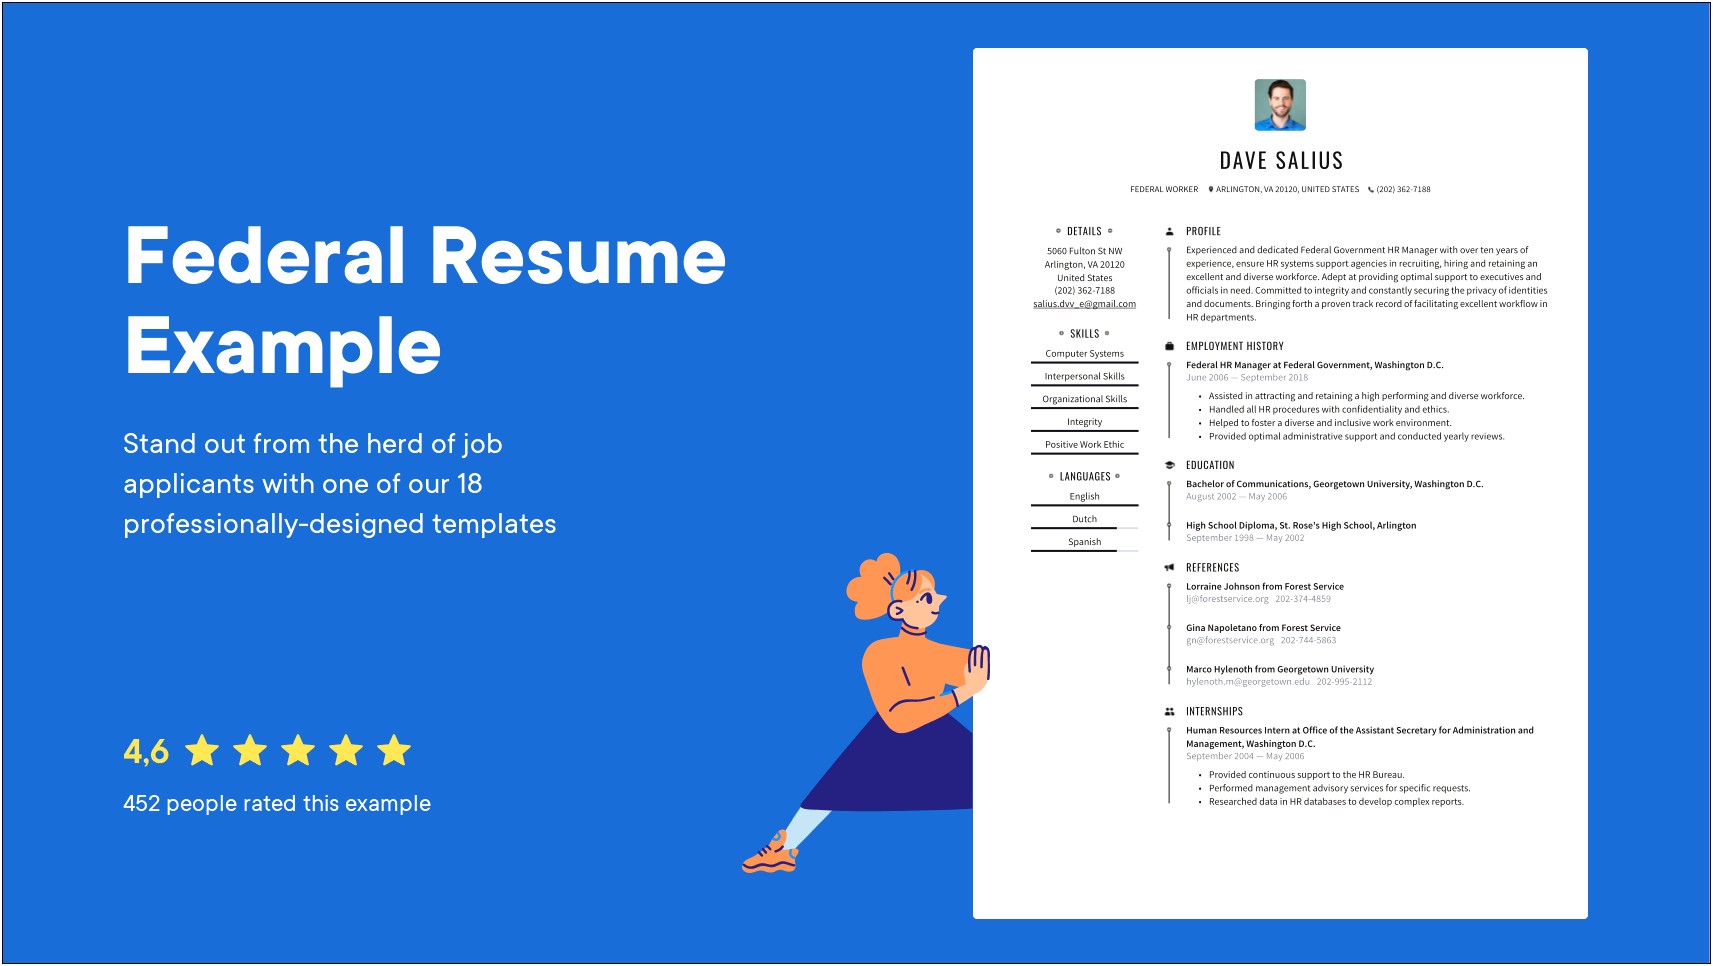 Federal Resume Samples With Examples Of Work